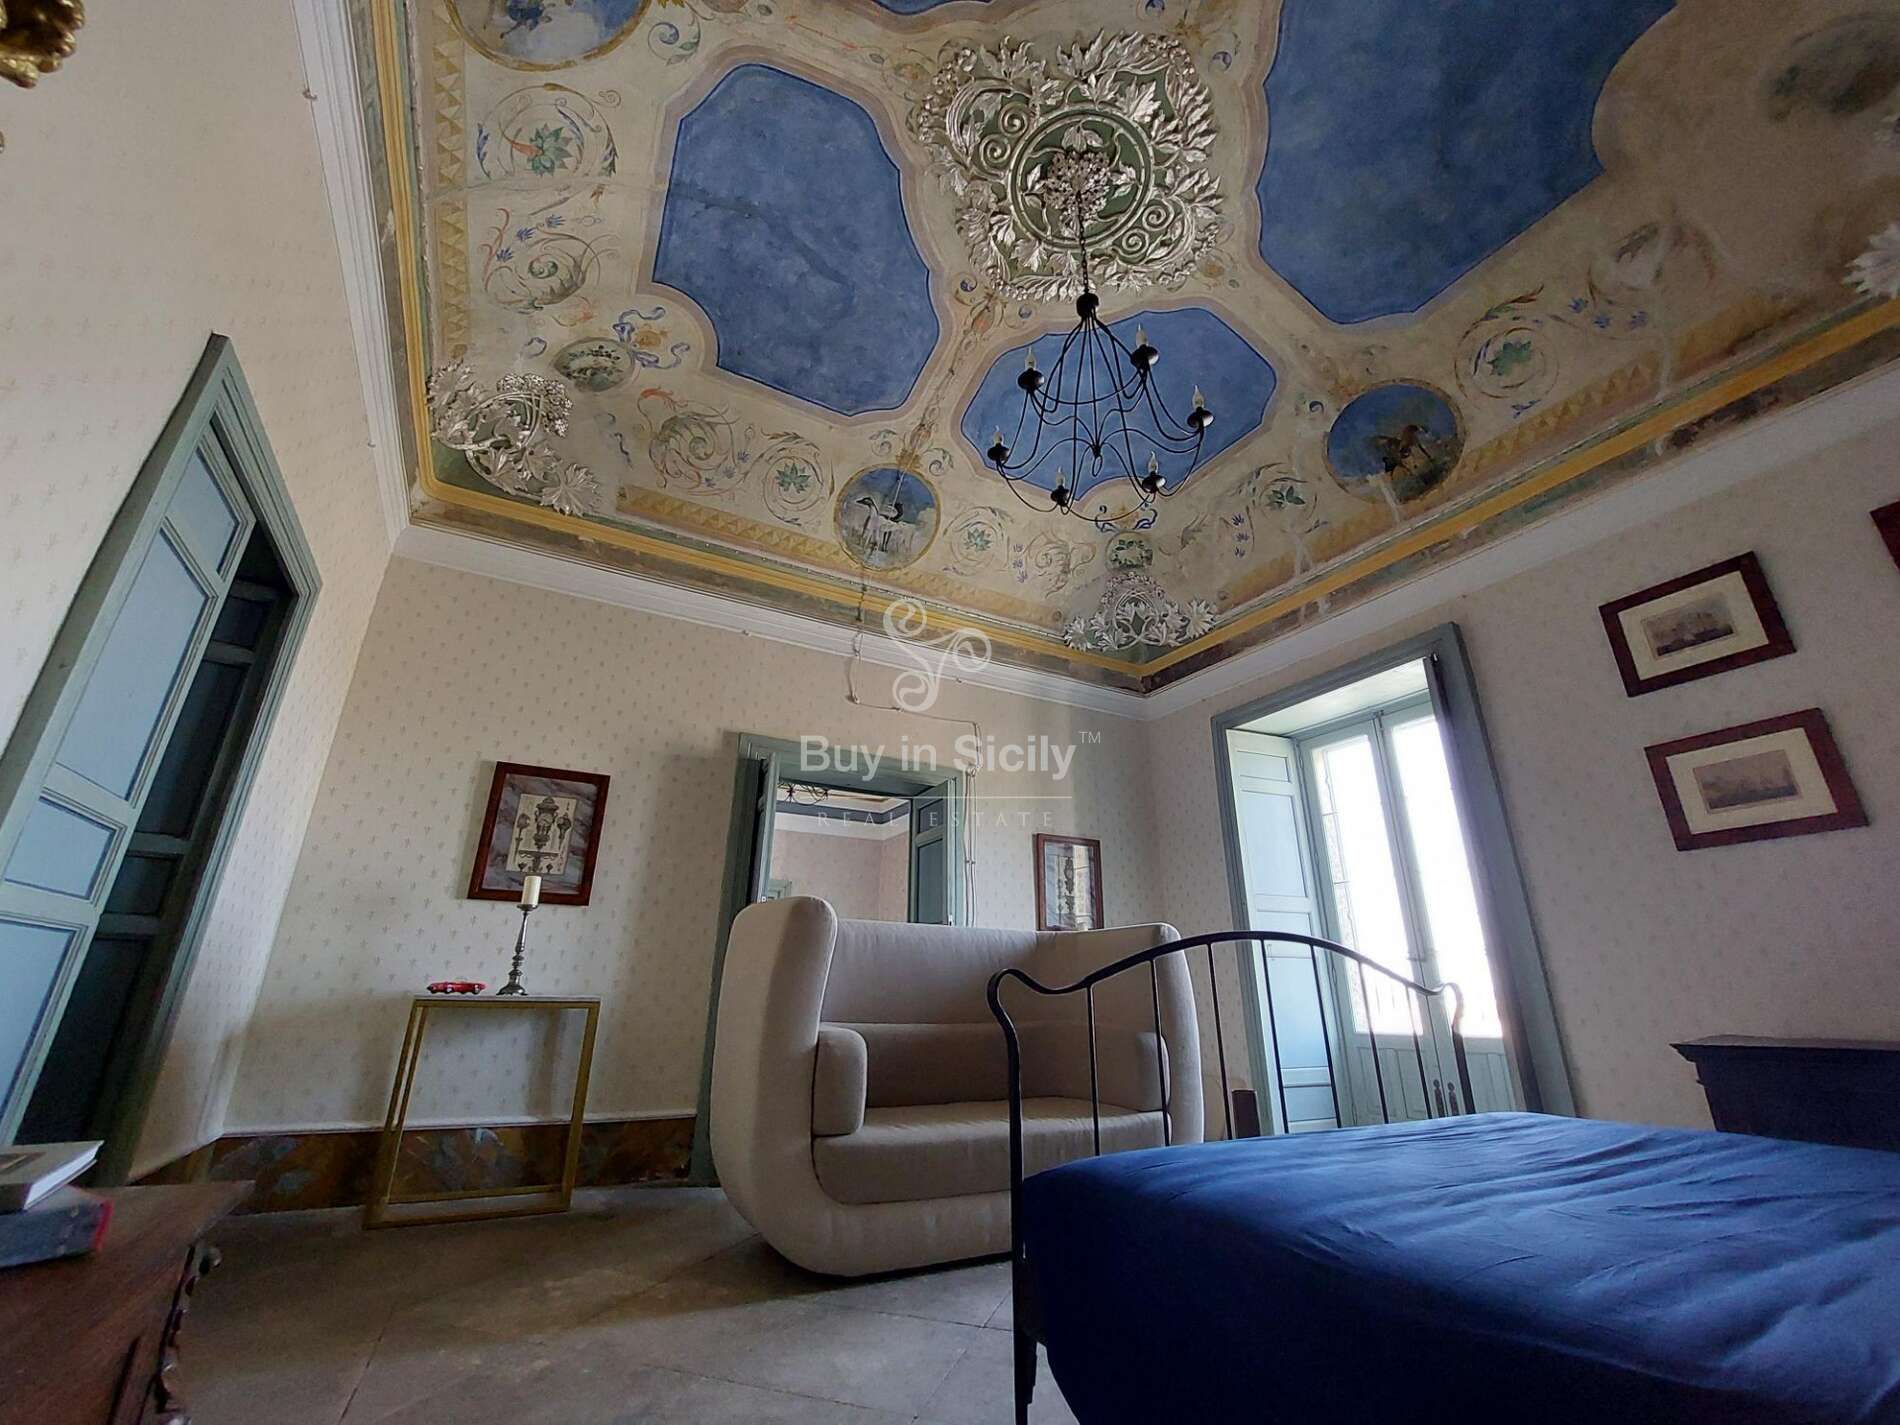 Historic aristocratic palace, with garden and terraces with a breathtaking view, located in Vizzini.